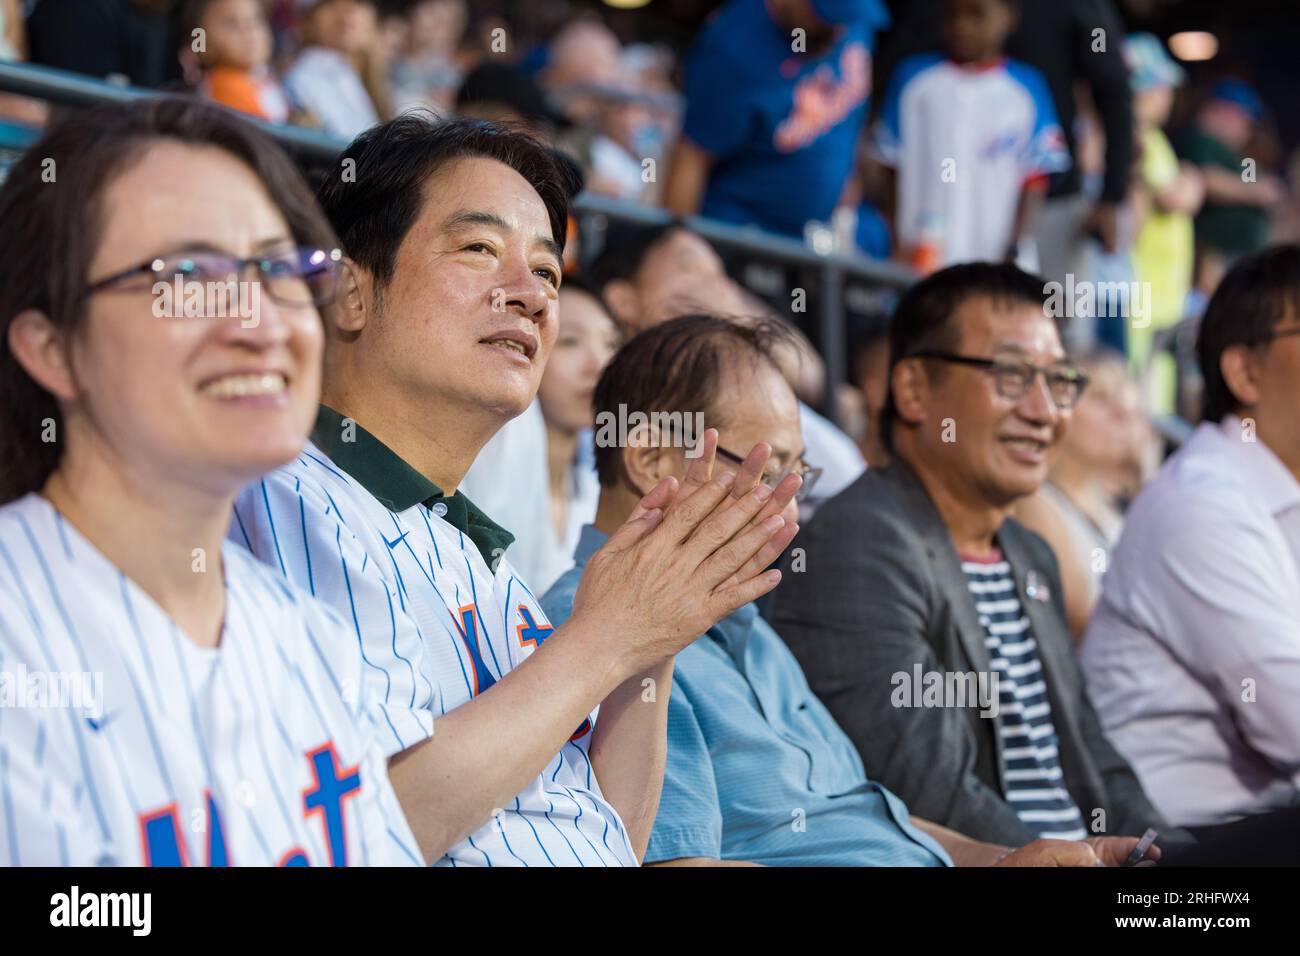 New York City, United States. 14th Aug, 2023. Taiwan Vice President William Lai, center, and Taiwan Representative to the United States Hsiao Bi-khim, left, watch the New York Mets play the Oakland Athletics at Citi Field, August 14, 2023 in New York City, New York. Lai attended a New York Mets professional baseball game during a stopover on his way from Taipei to Paraguay. Credit: Shufu Liu/Taiwan Presidential Office/Alamy Live News Stock Photo